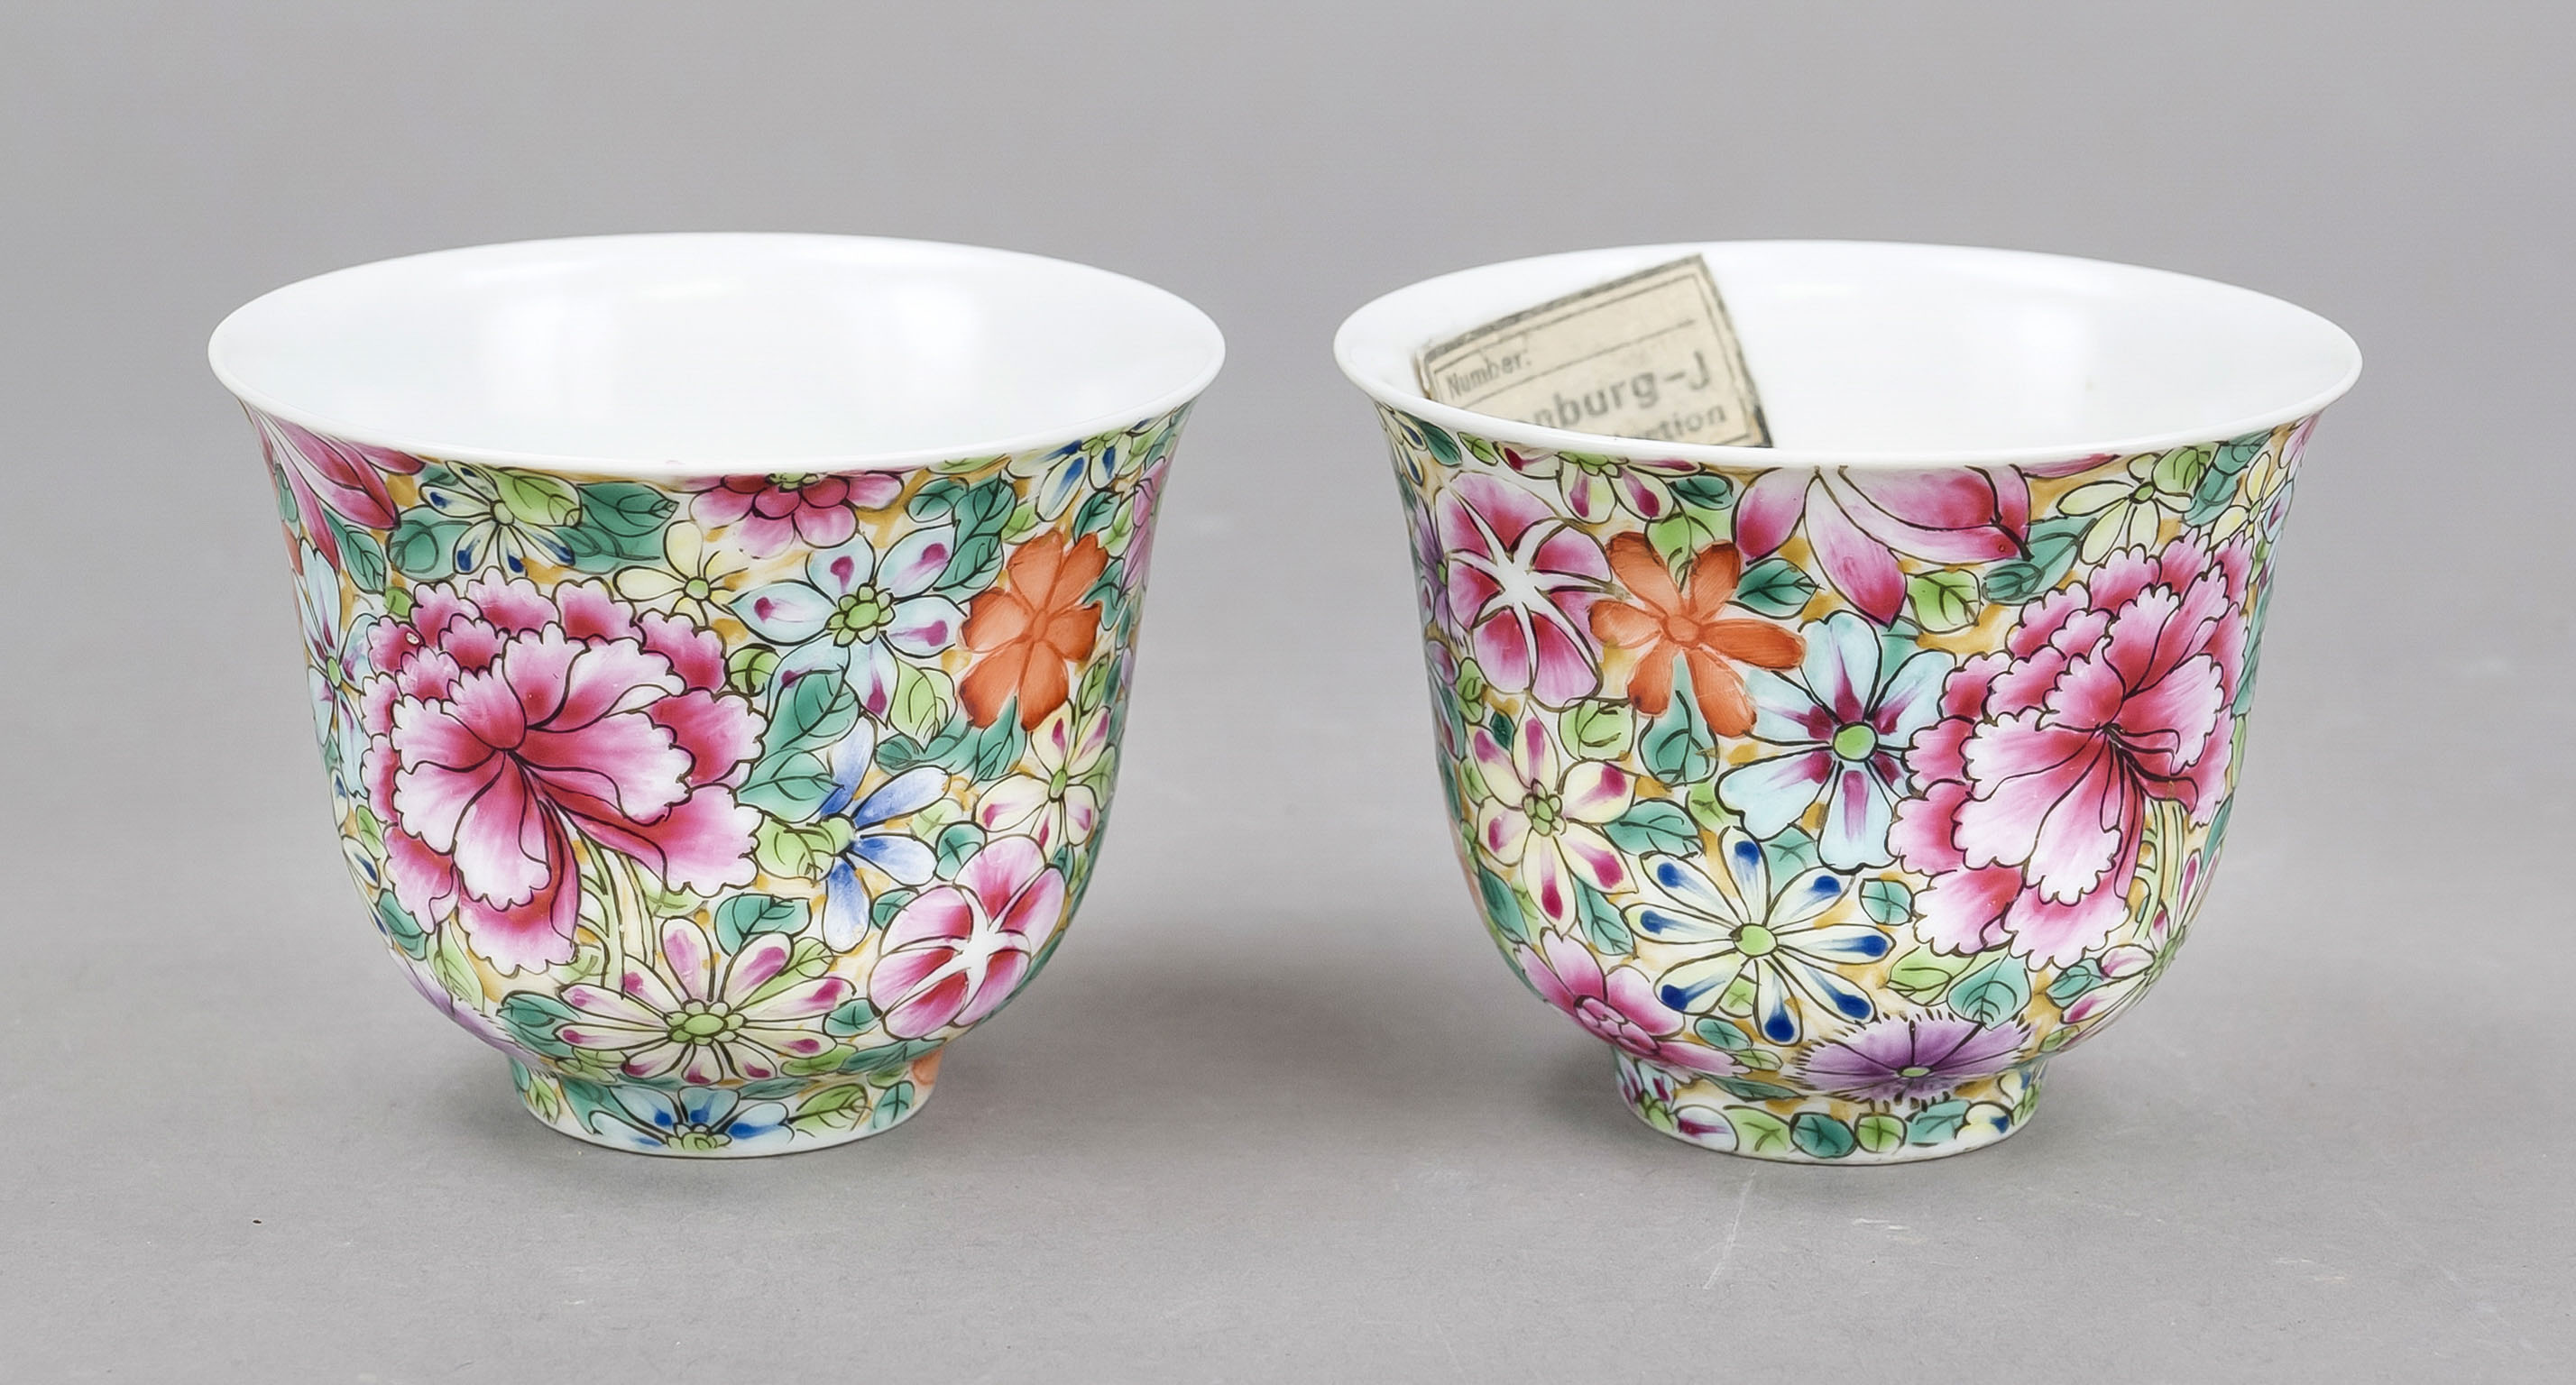 Pair of famille rose millefiori cups, China 18th century (Qing/Qianlong). Curved wall with